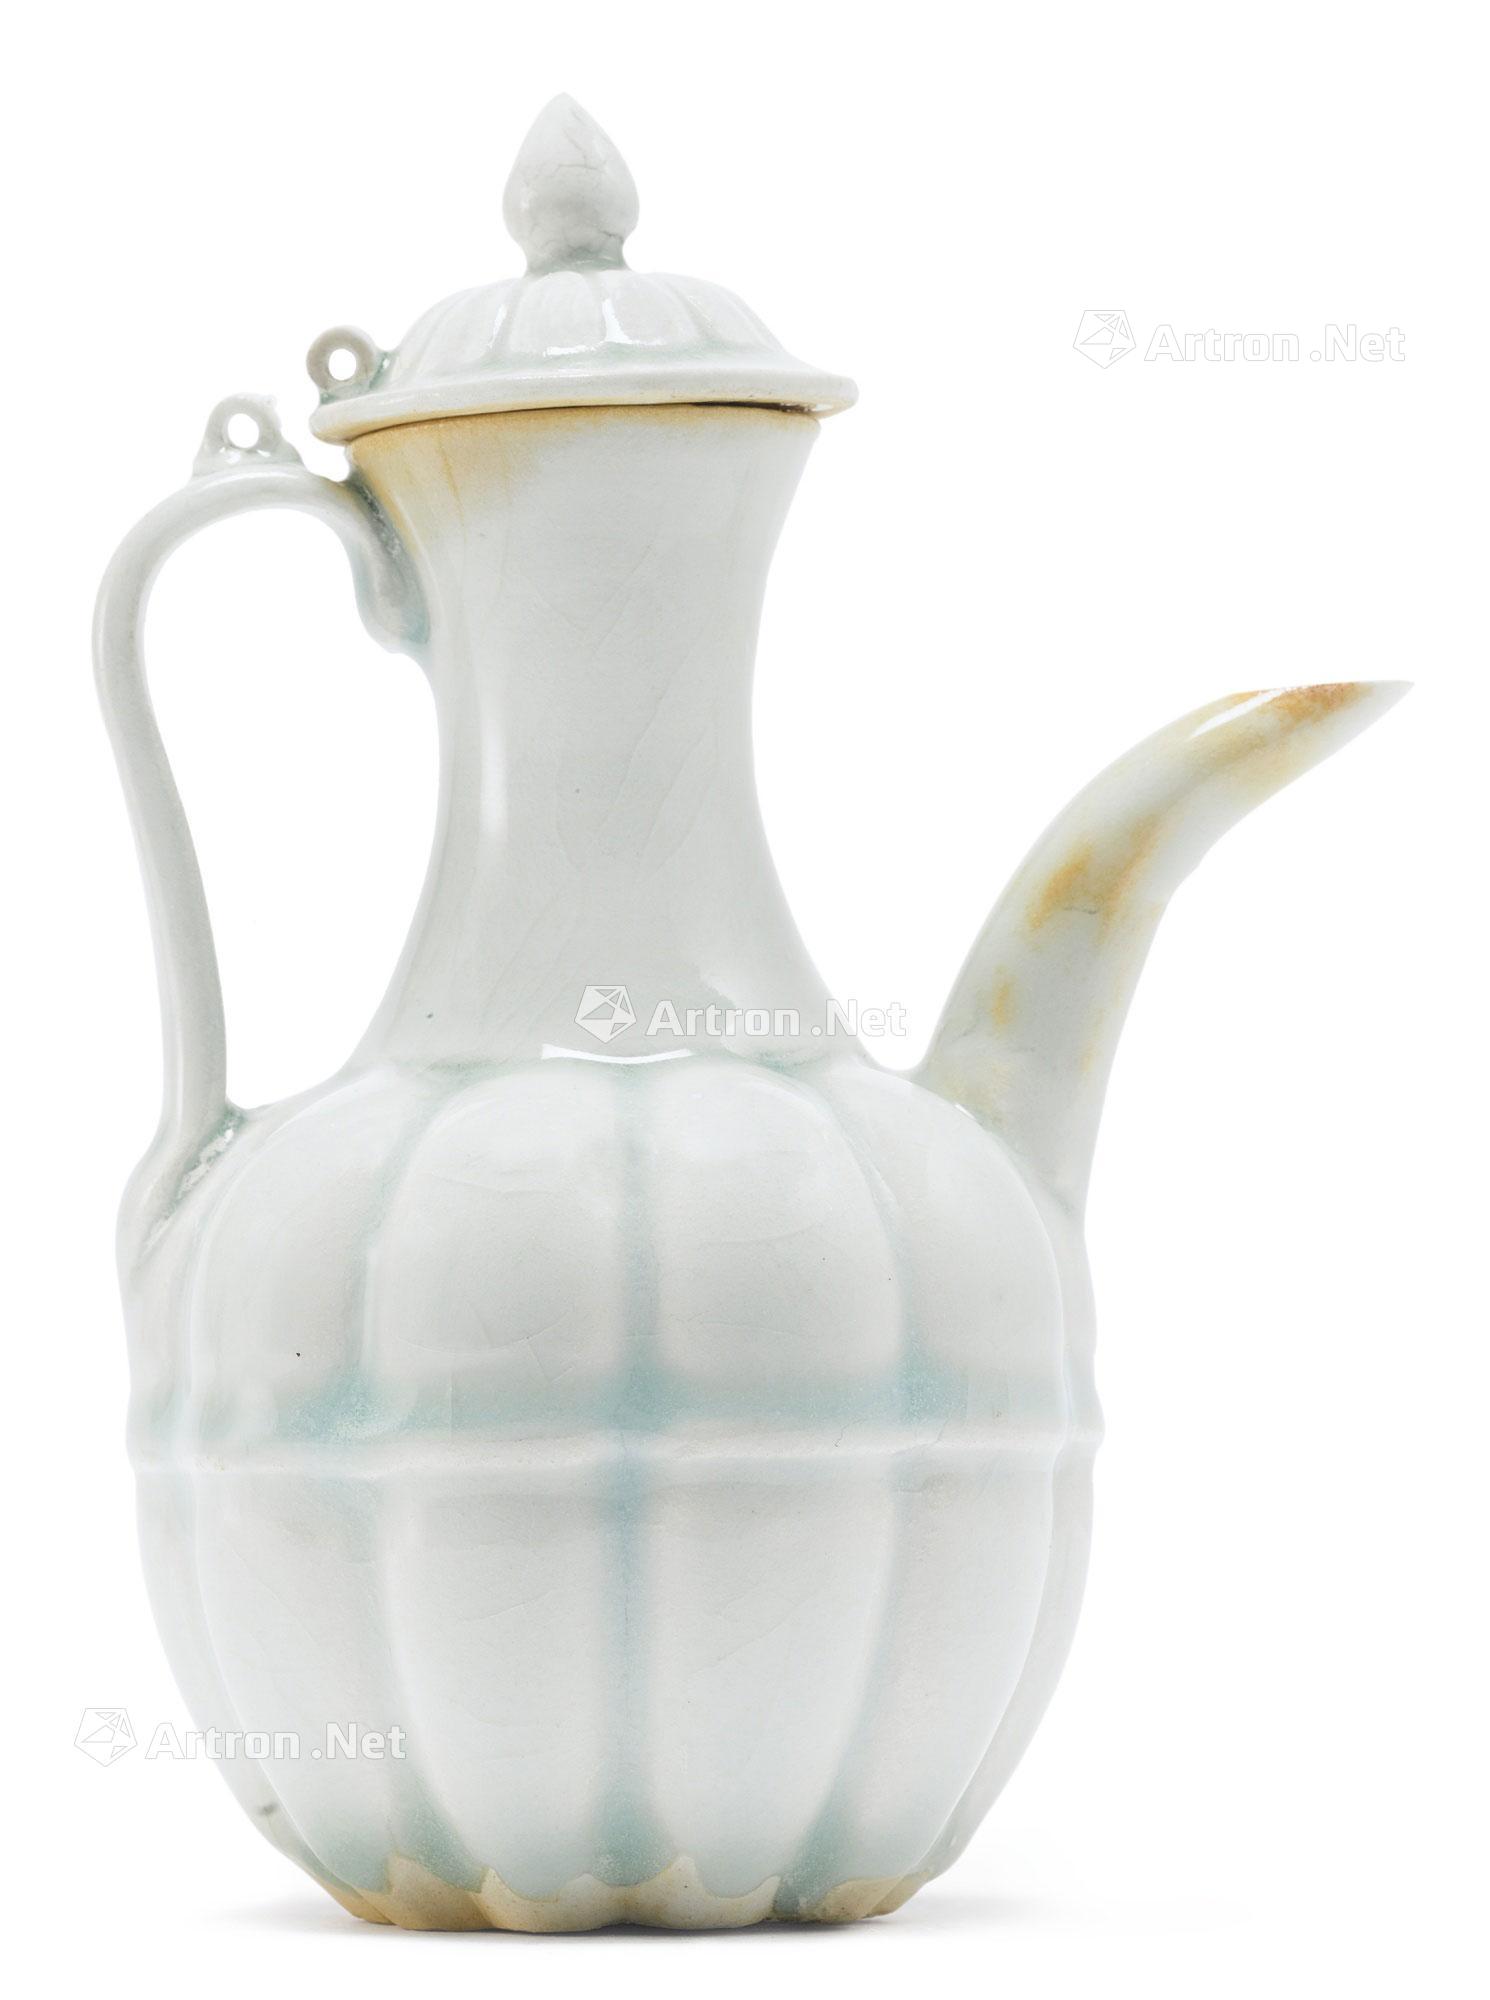 The song dynasty Green melon leng craft with cover ewer